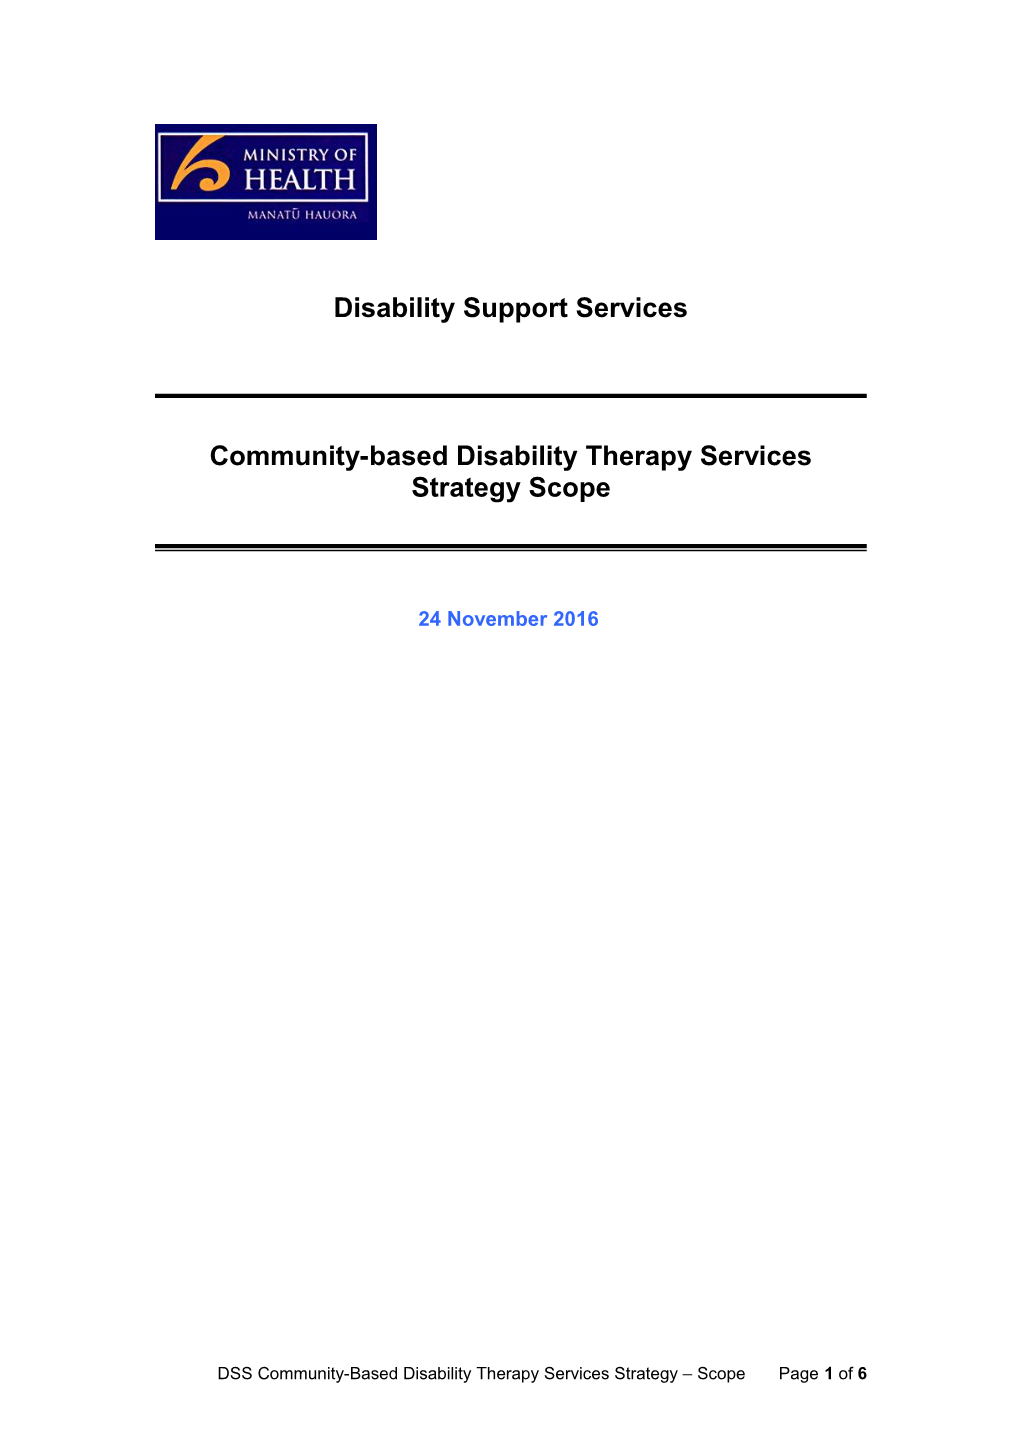 Community-Based Disability Therapy Services Strategy Scope